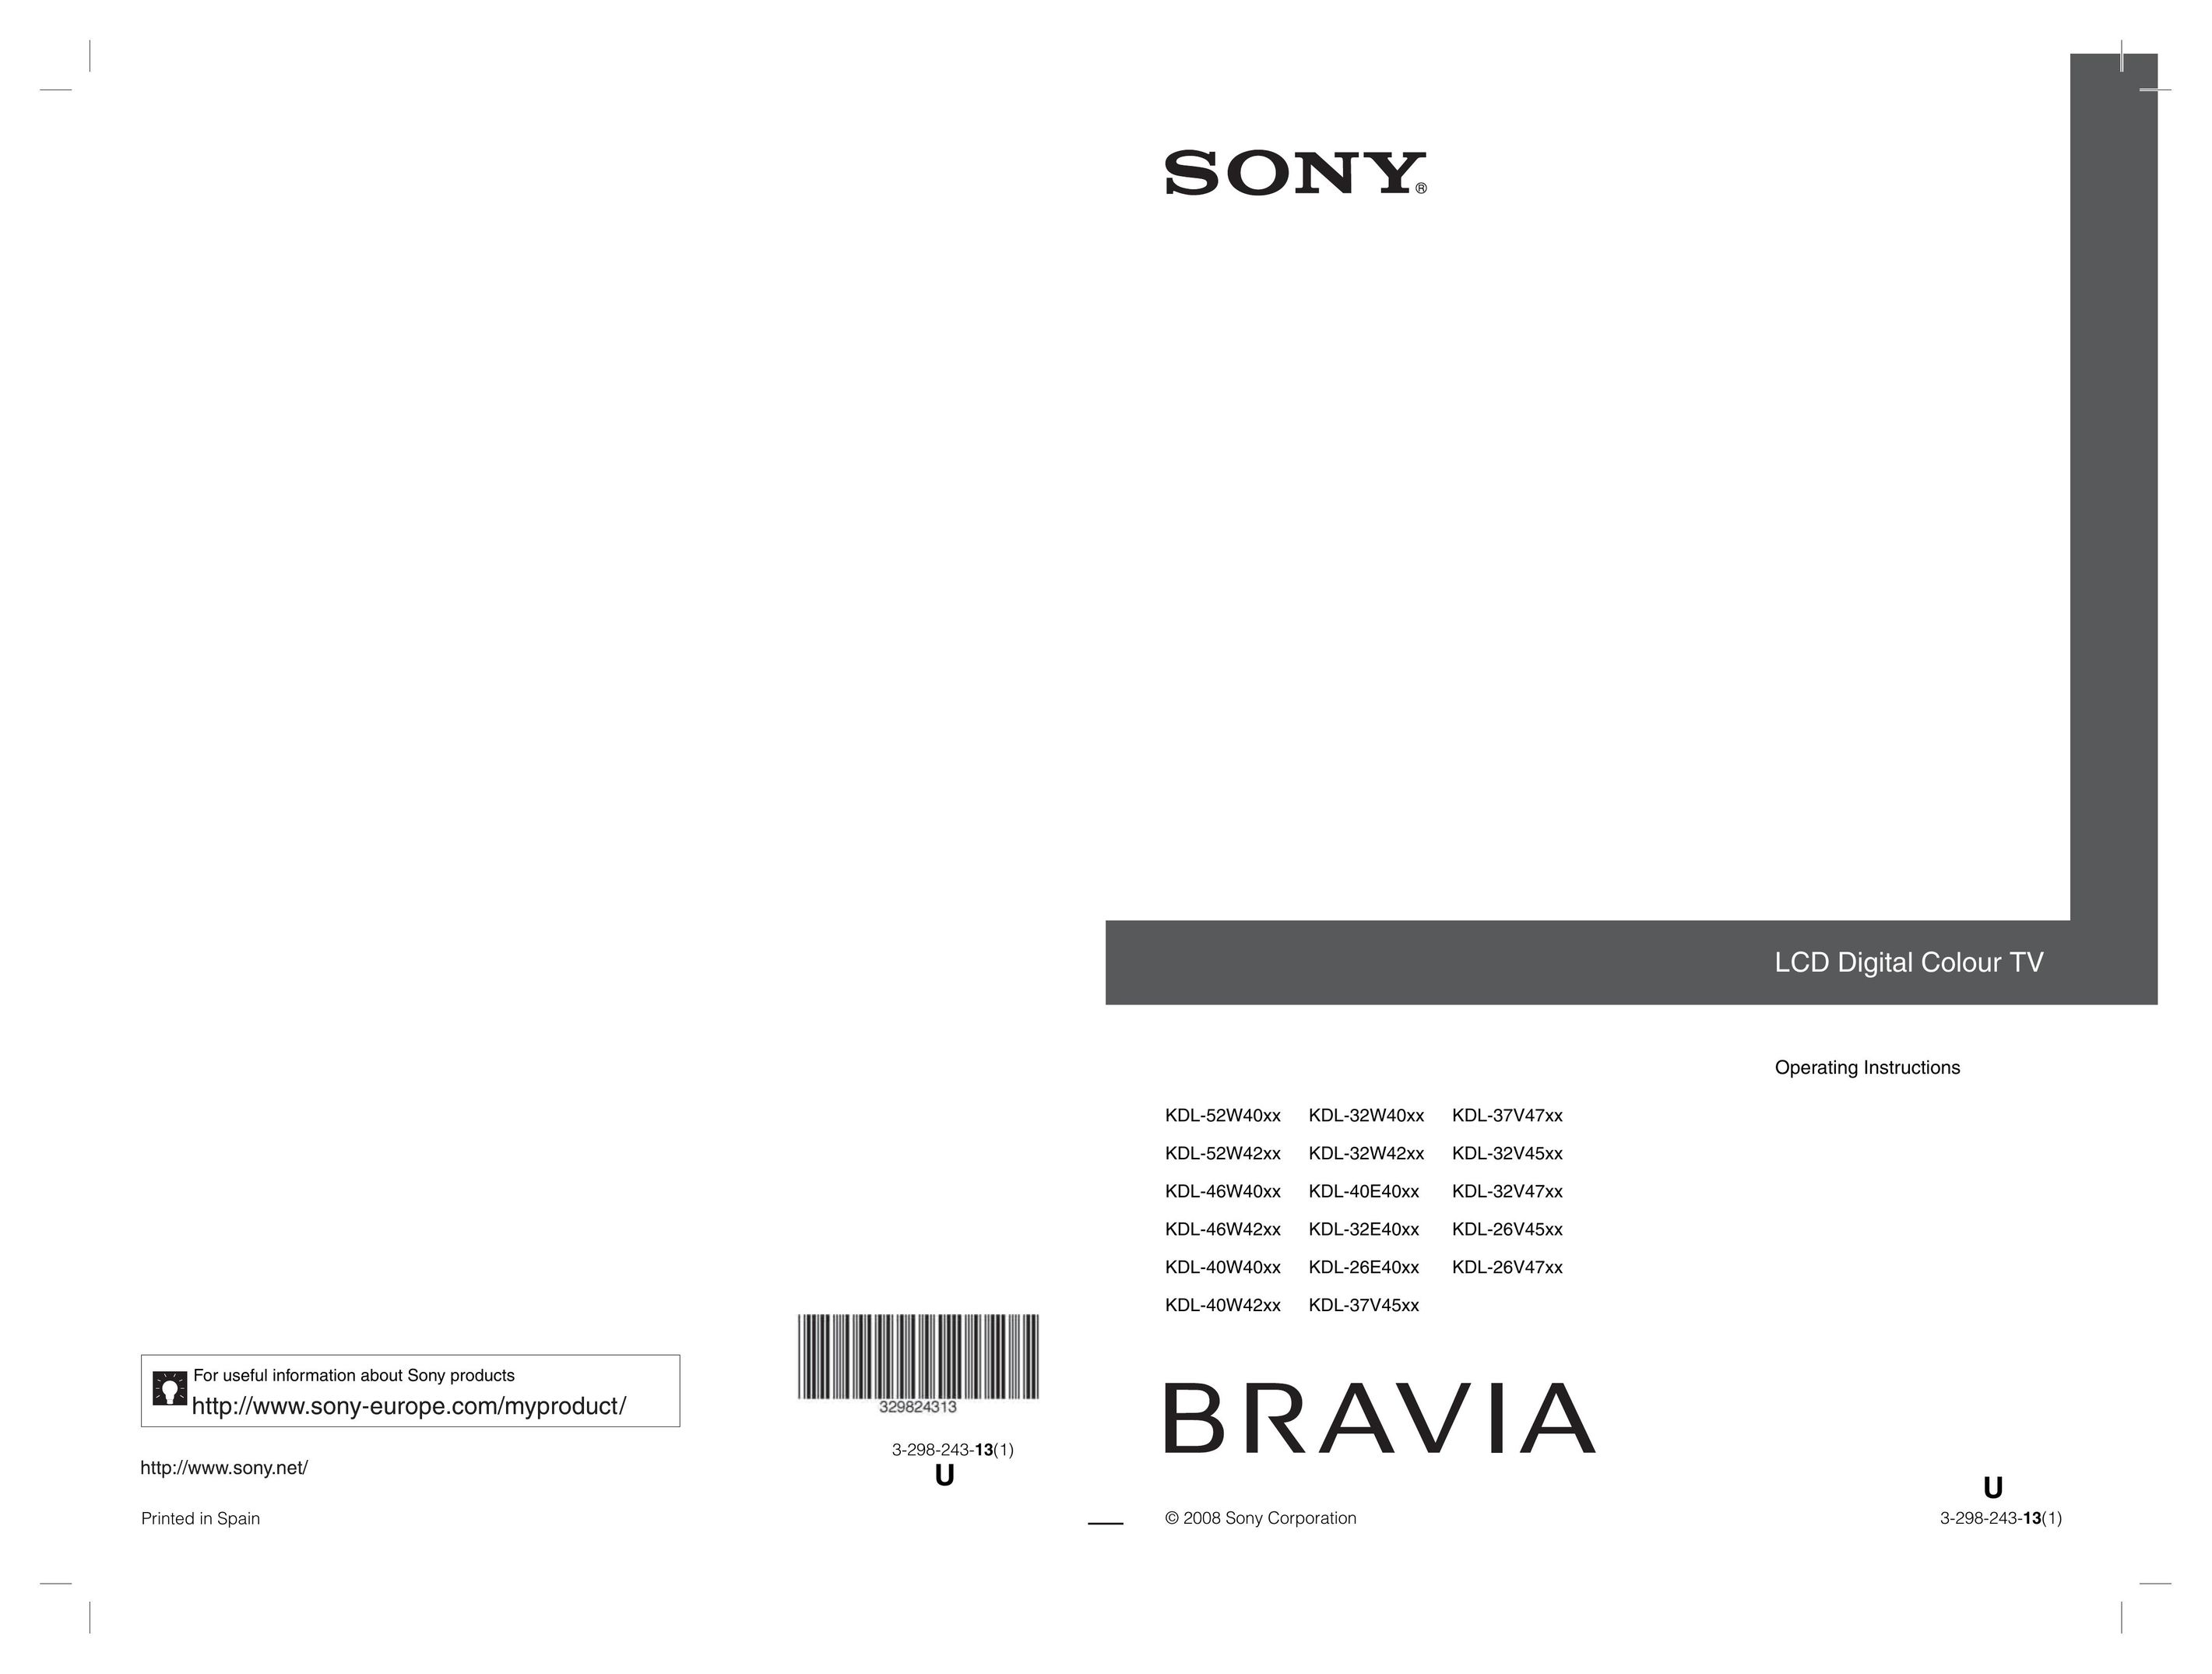 Sony 3-298-243-13(1) Flat Panel Television User Manual